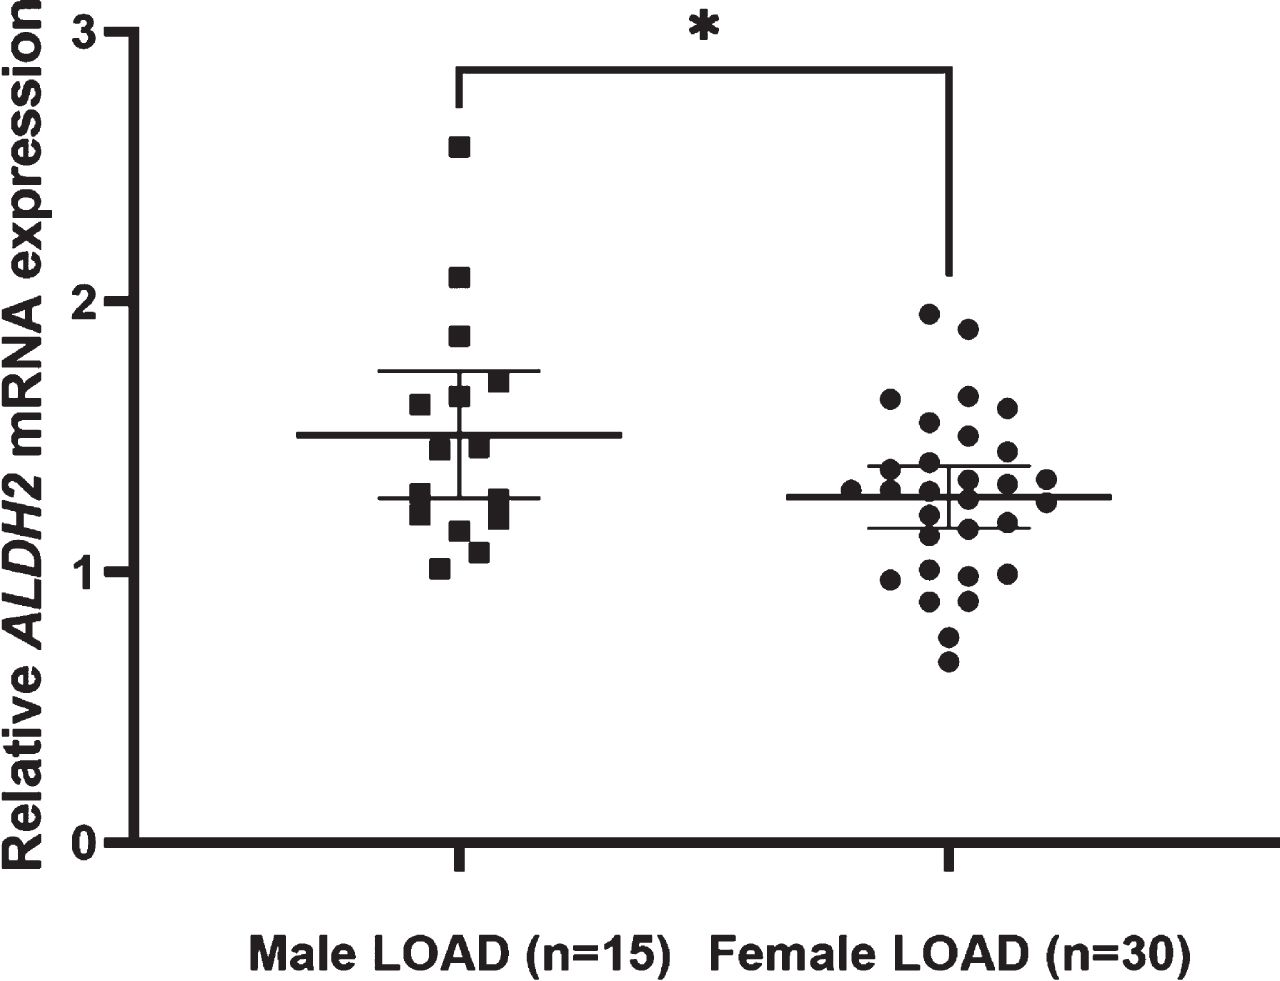 Relative ALDH2 mRNA expression levels in male and female LOAD. The mean expression level is significantly higher in male LOAD subjects (1.51±0.43) than in female LOAD subjects (1.28±0.31) (Student’s t-test: p = 0.043). Lines are at means with 95% CI.